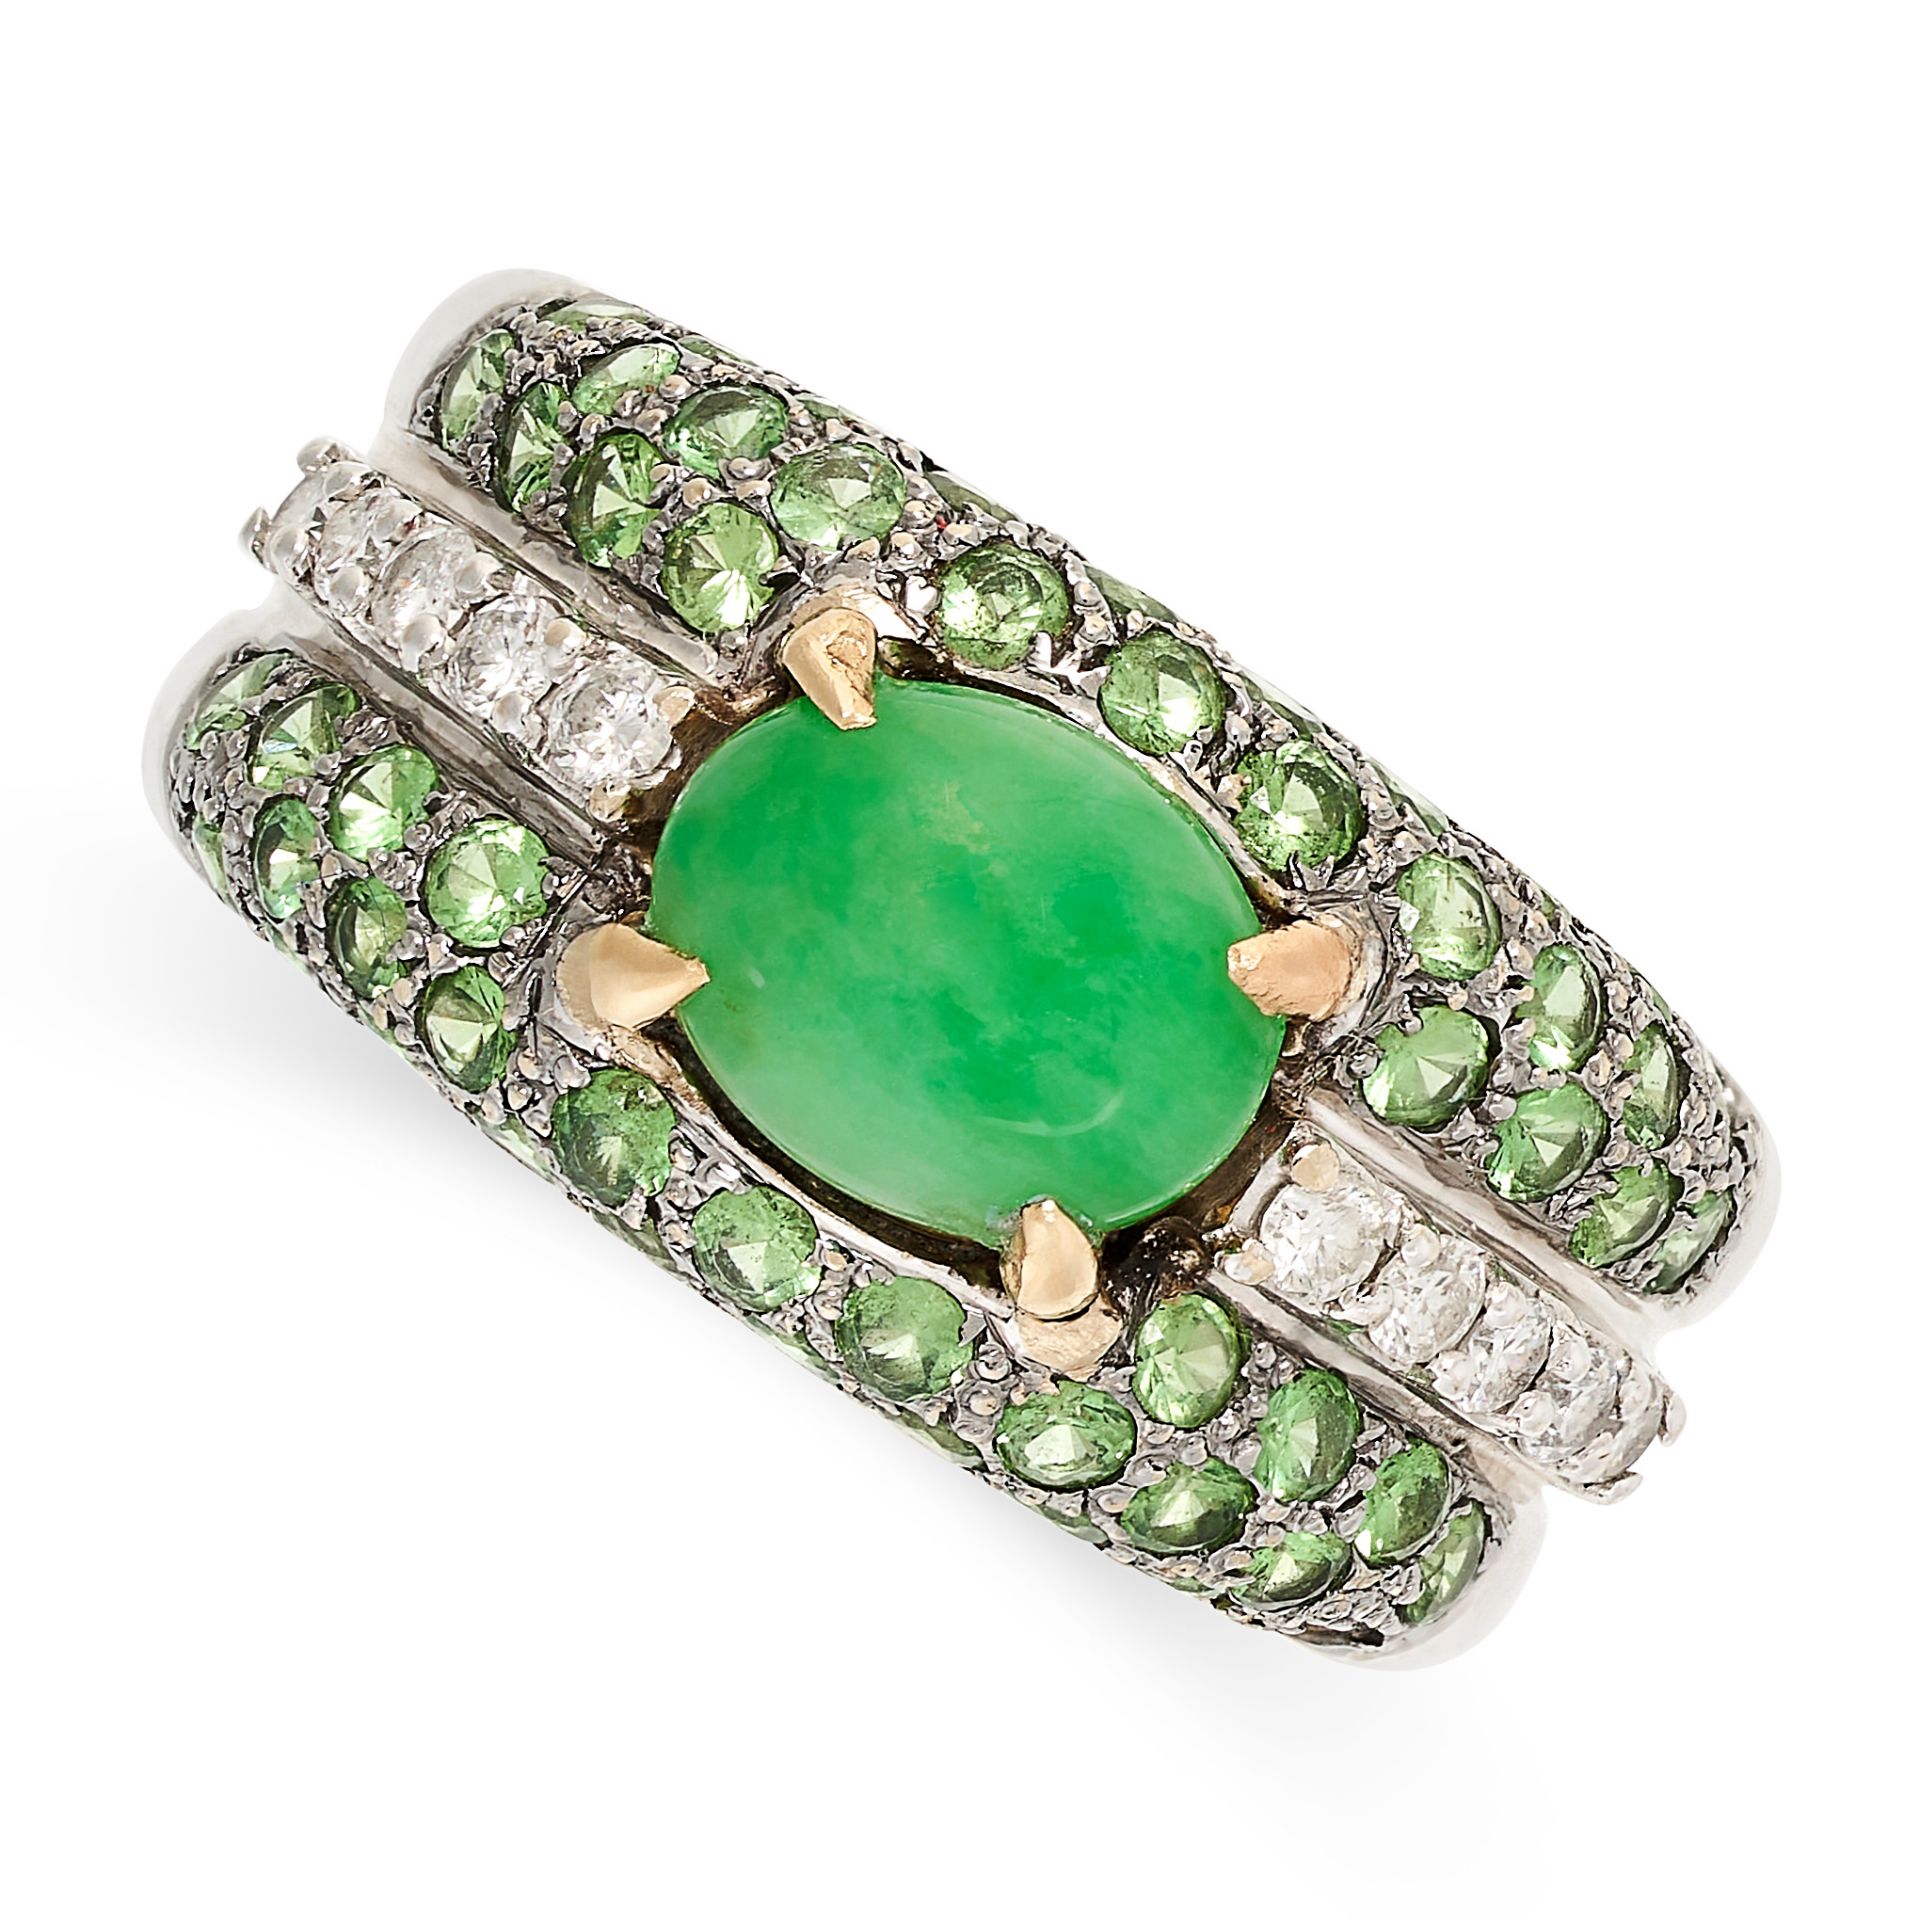 A JADEITE JADE, GREEN GARNET AND DIAMOND RING in 18ct gold, the tapering band set with a cabochon